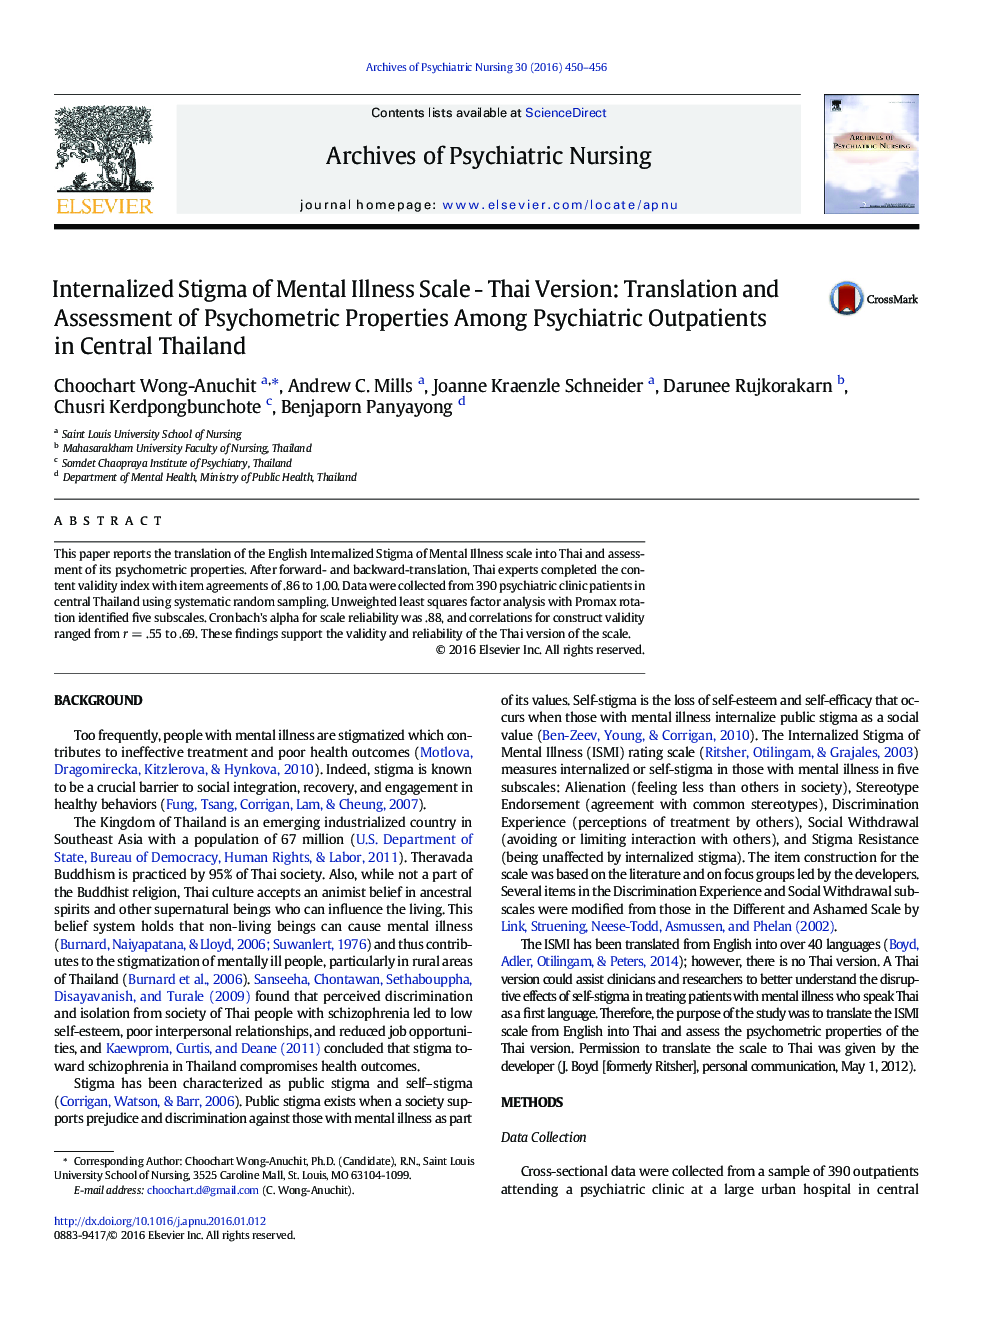 Internalized Stigma of Mental Illness Scale - Thai Version: Translation and Assessment of Psychometric Properties Among Psychiatric Outpatients in Central Thailand